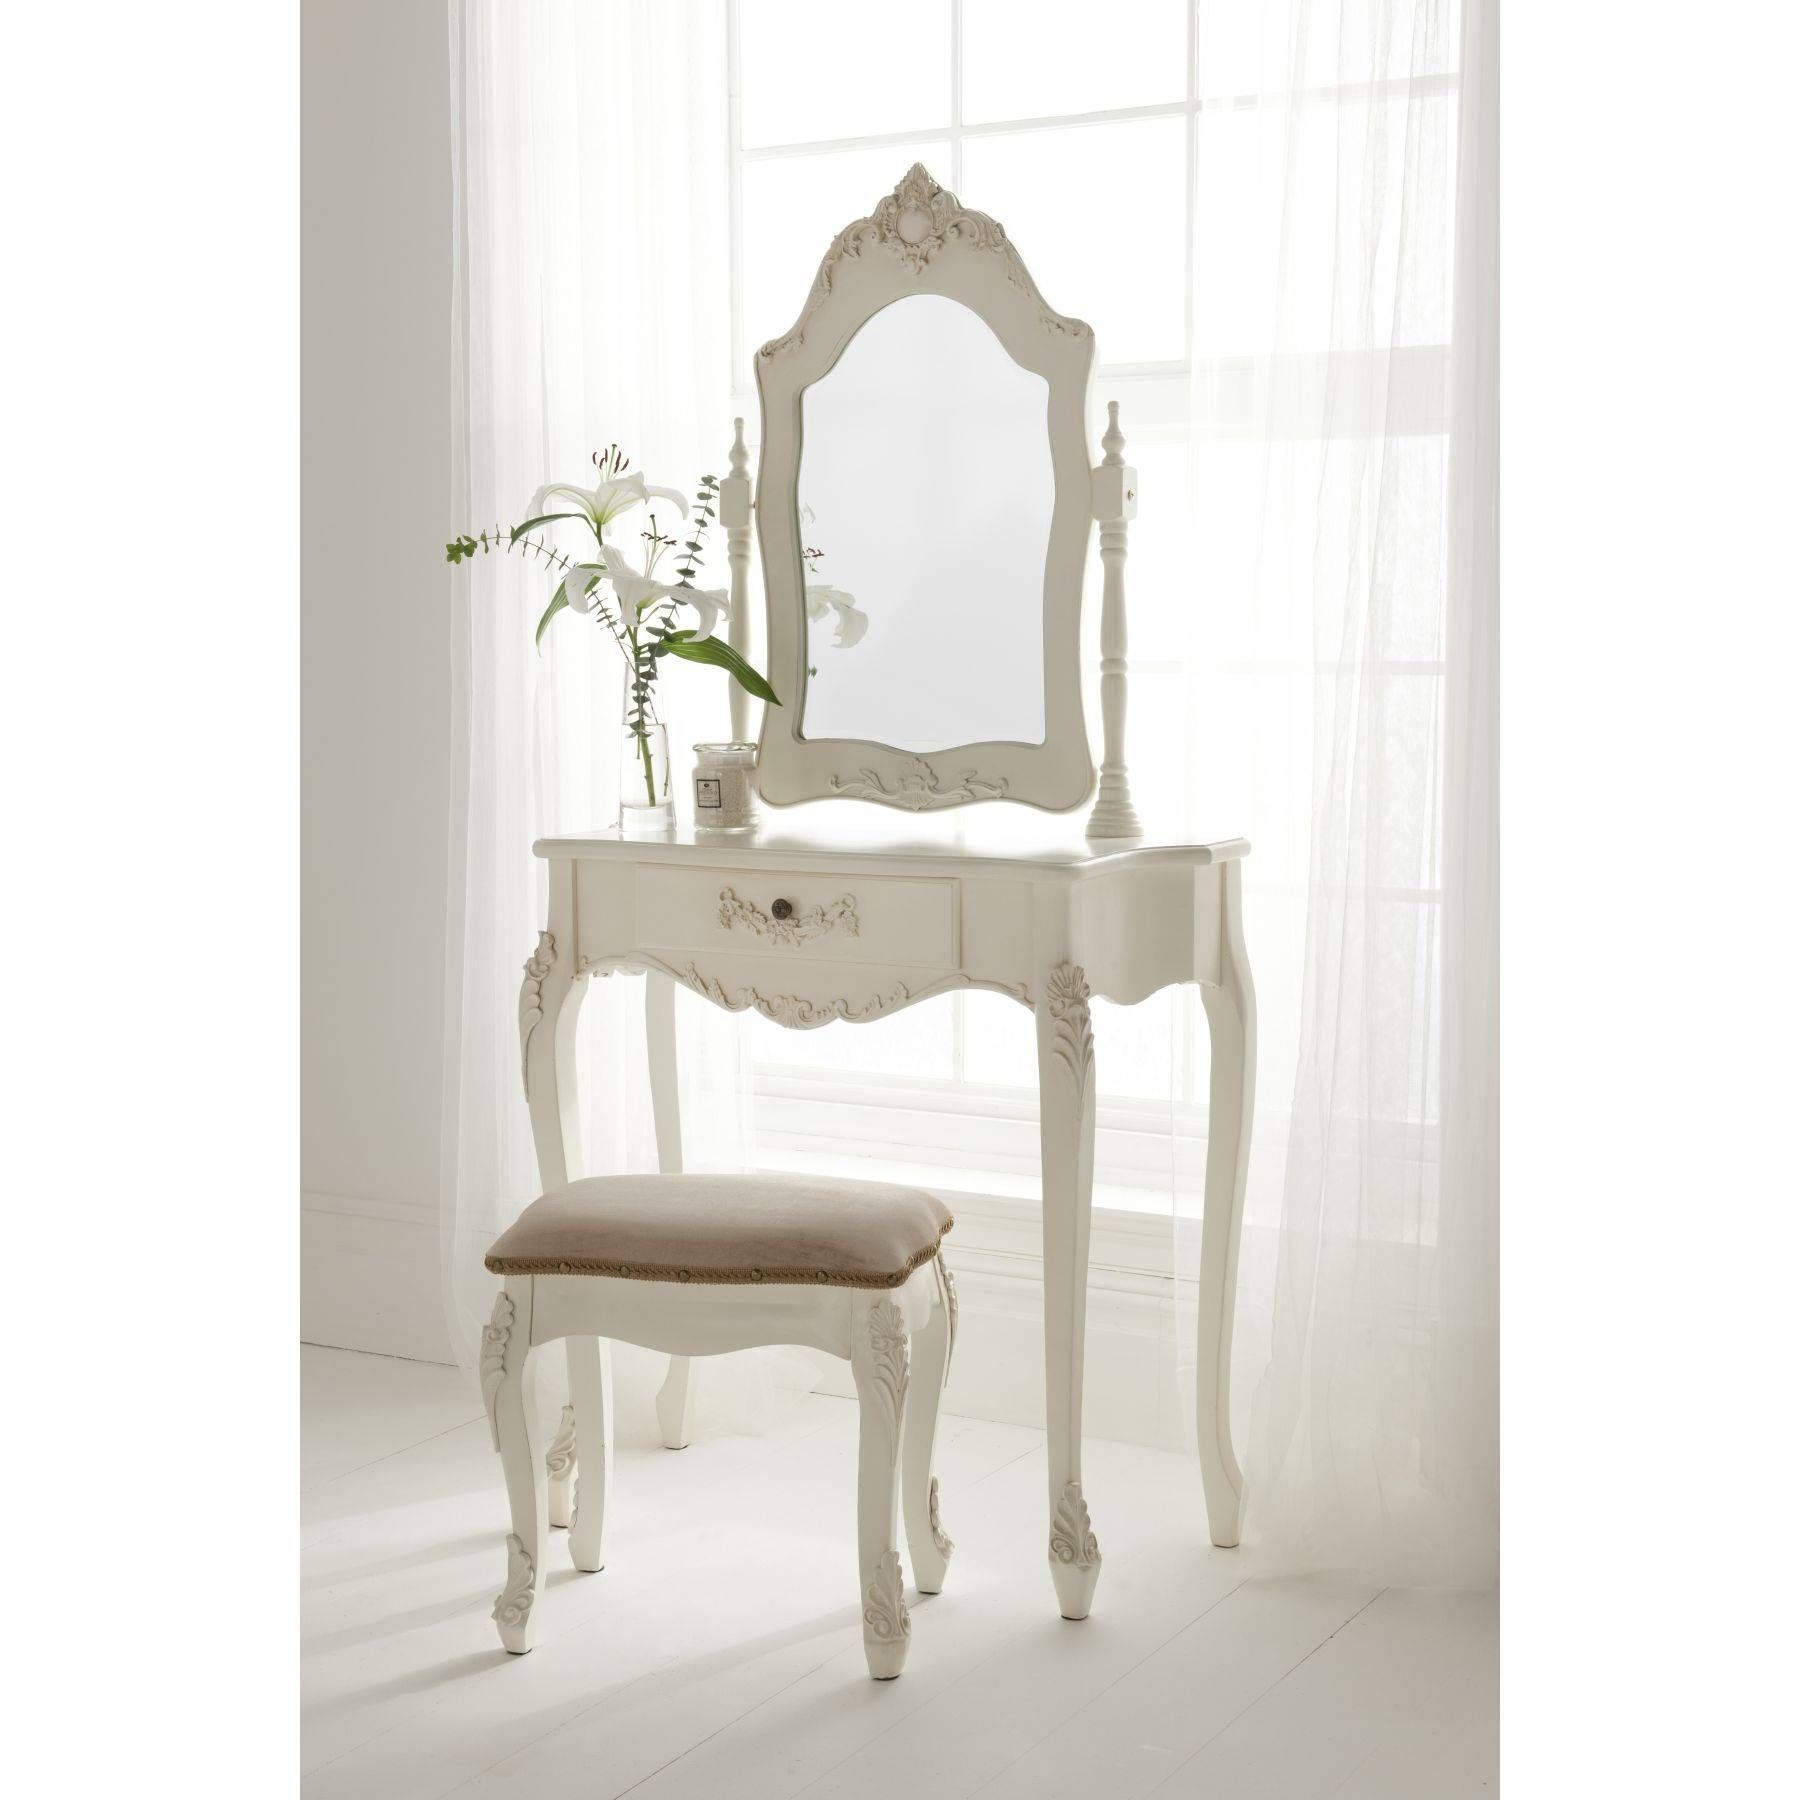 Bedroom Furniture : Vanity Knobs Wall Mirrors Decorative Dressing Regarding Decorative Dressing Table Mirrors (View 11 of 25)